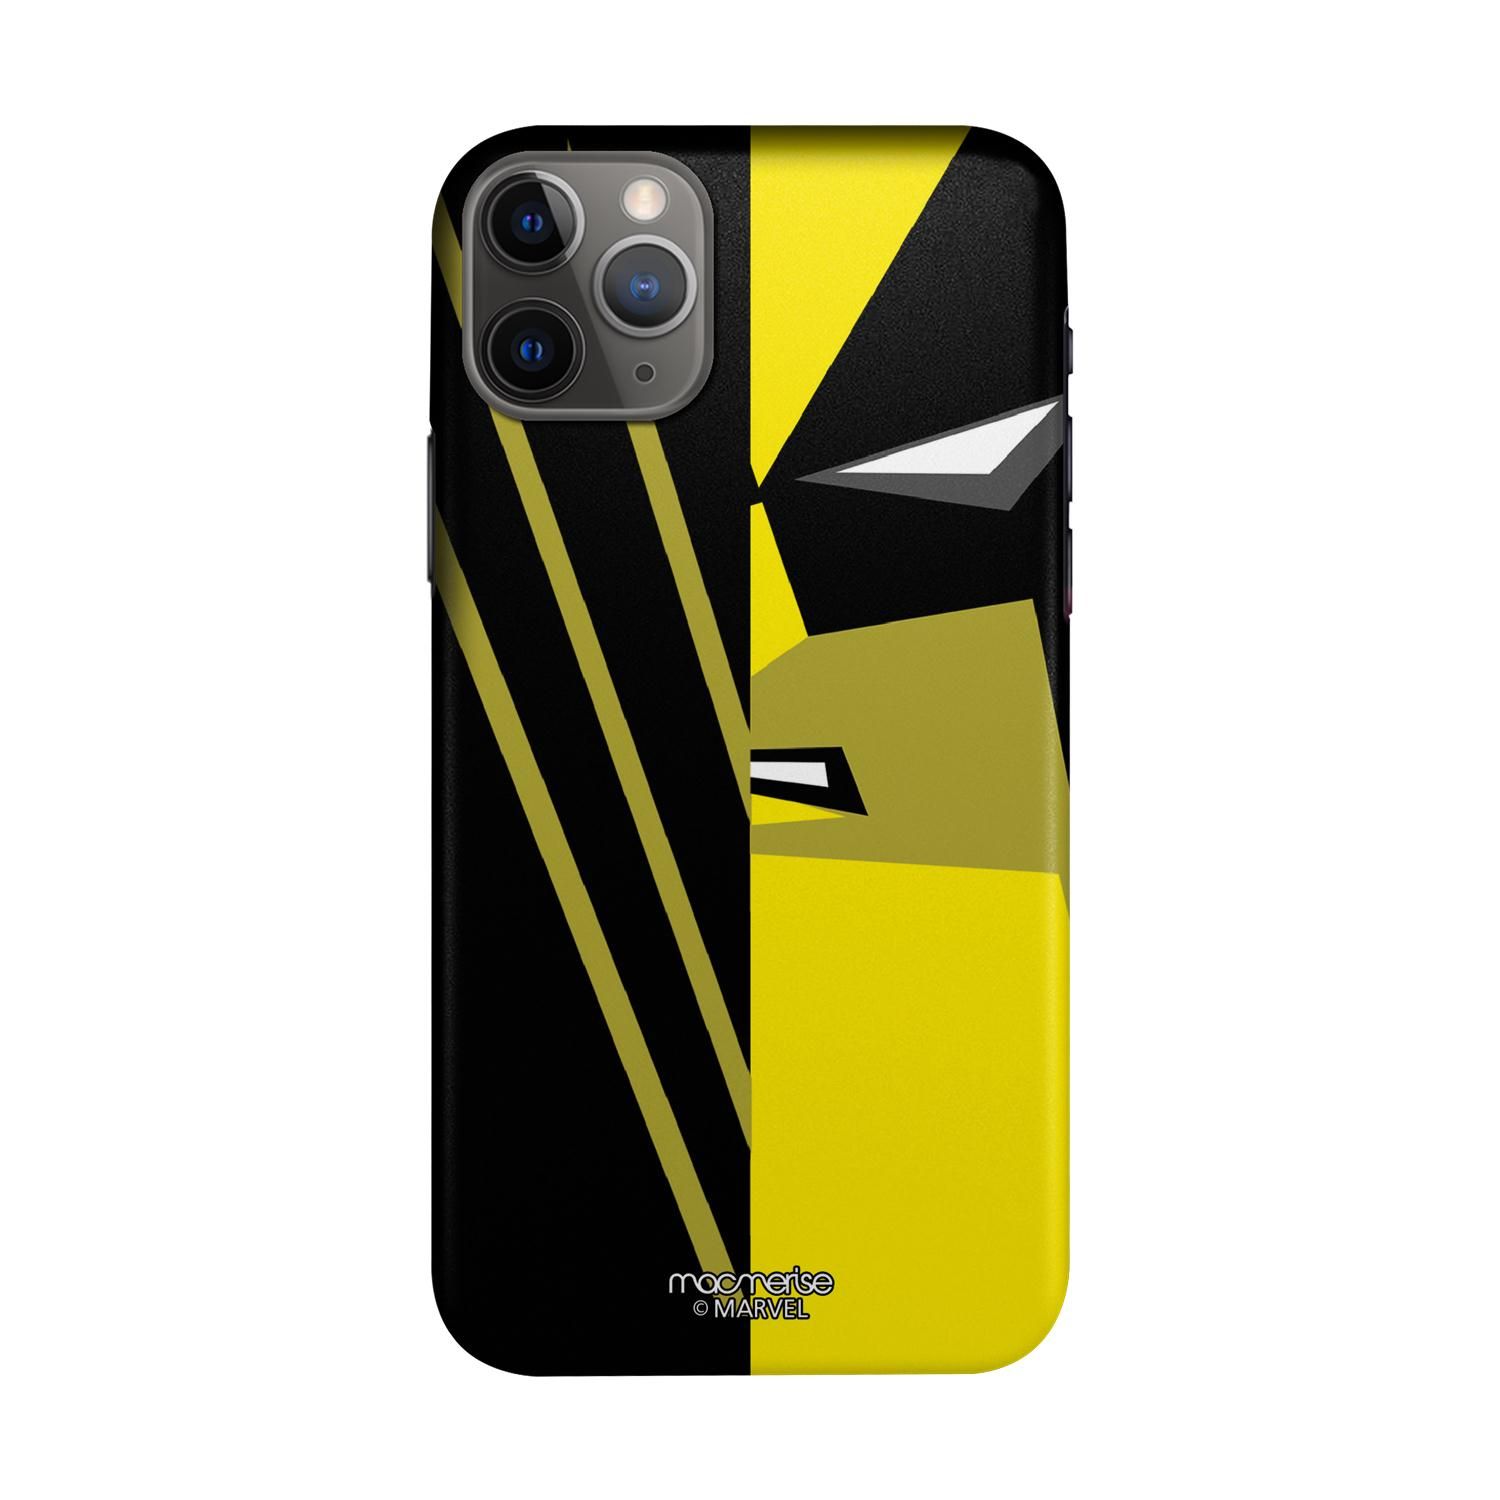 Buy Face Focus Wolverine - Sleek Phone Case for iPhone 11 Pro Max Online